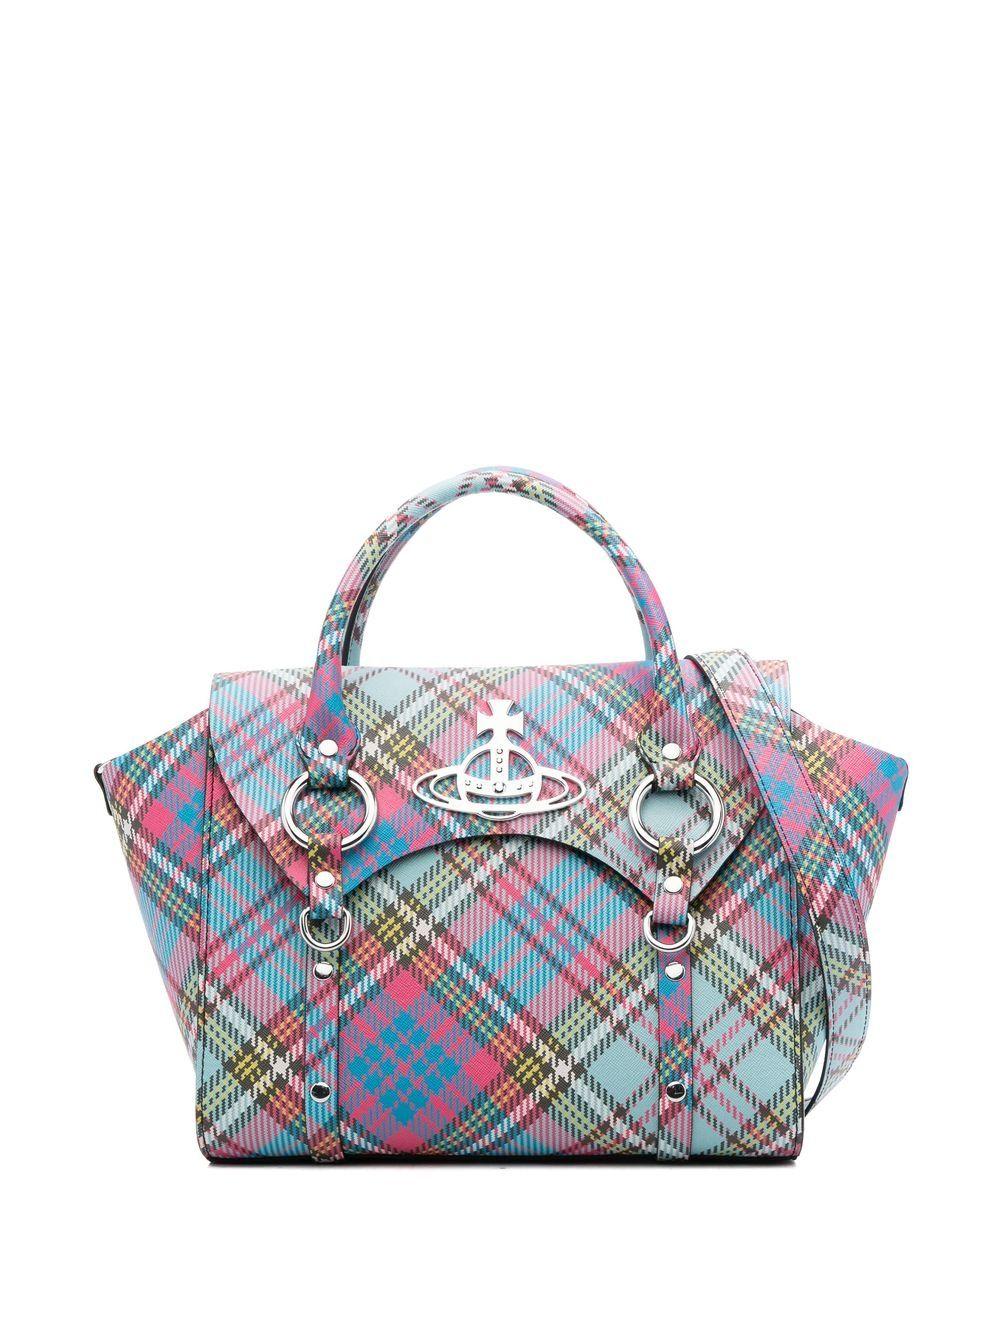 Vivienne Westwood Betty Check-print Tote Bag in Blue | Lyst